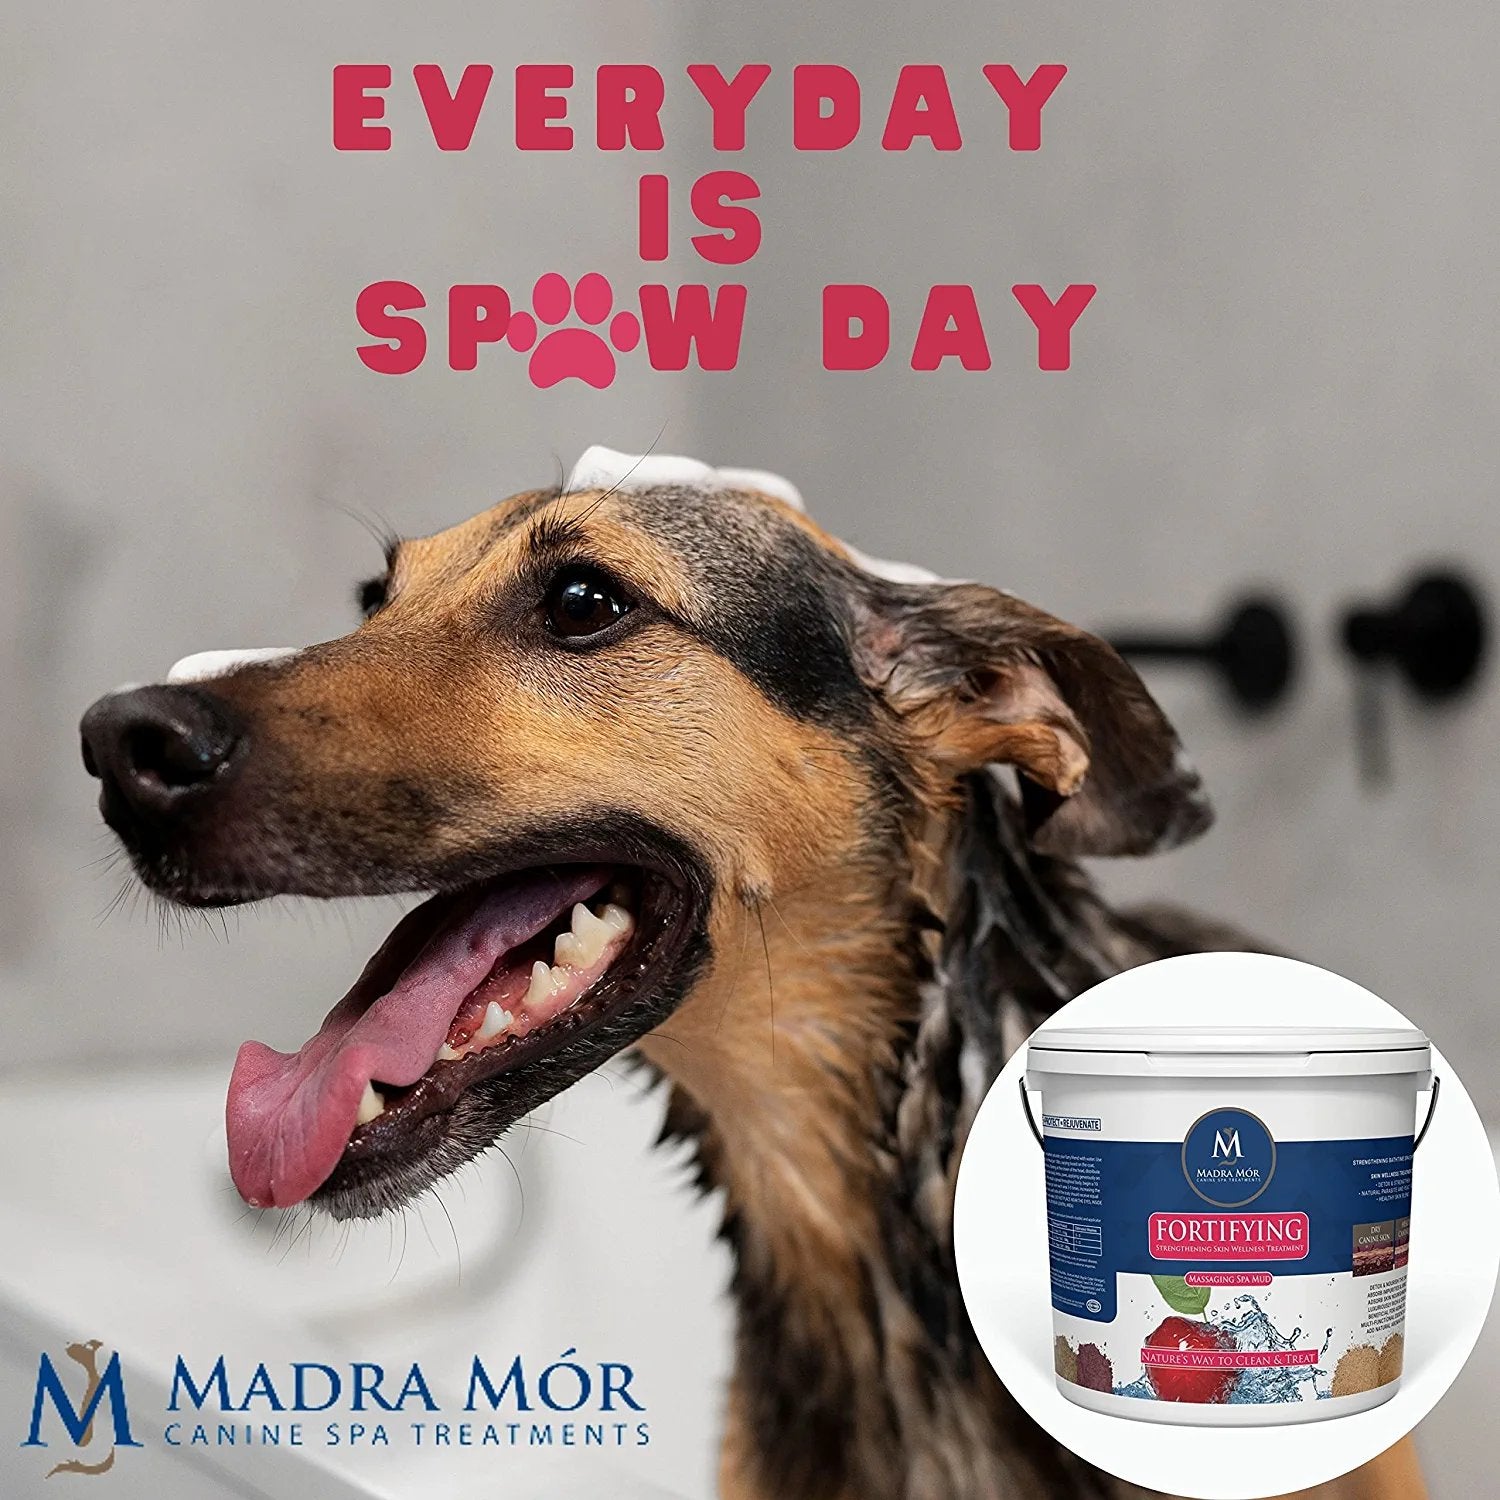 Madra Mor Dog Essentials Fortifying Spa Mud | Dog Wash | Dog Grooming | Dry Skin for Dogs Treatment | Dog Bath | Dog Coat Skin Care Products | 7.5lb Pail w Worldwide Nutrition Multi Purpose Key Chain